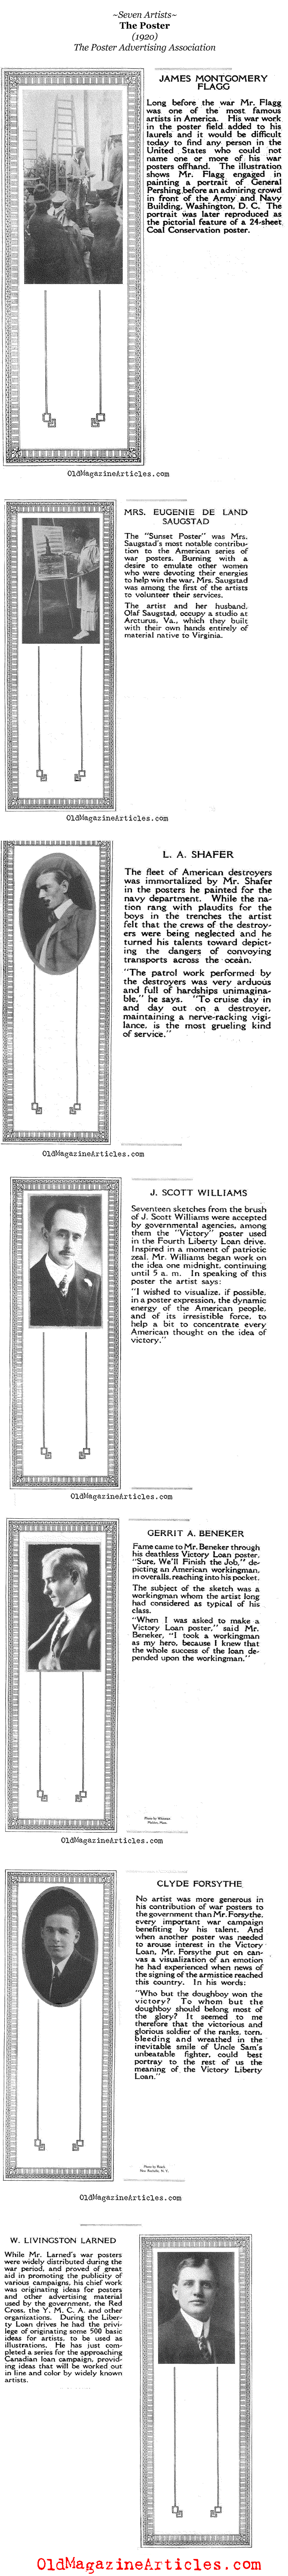 James Montgomery Flagg and Six Other W.W. I Poster Artists  (The Poster, 1920)